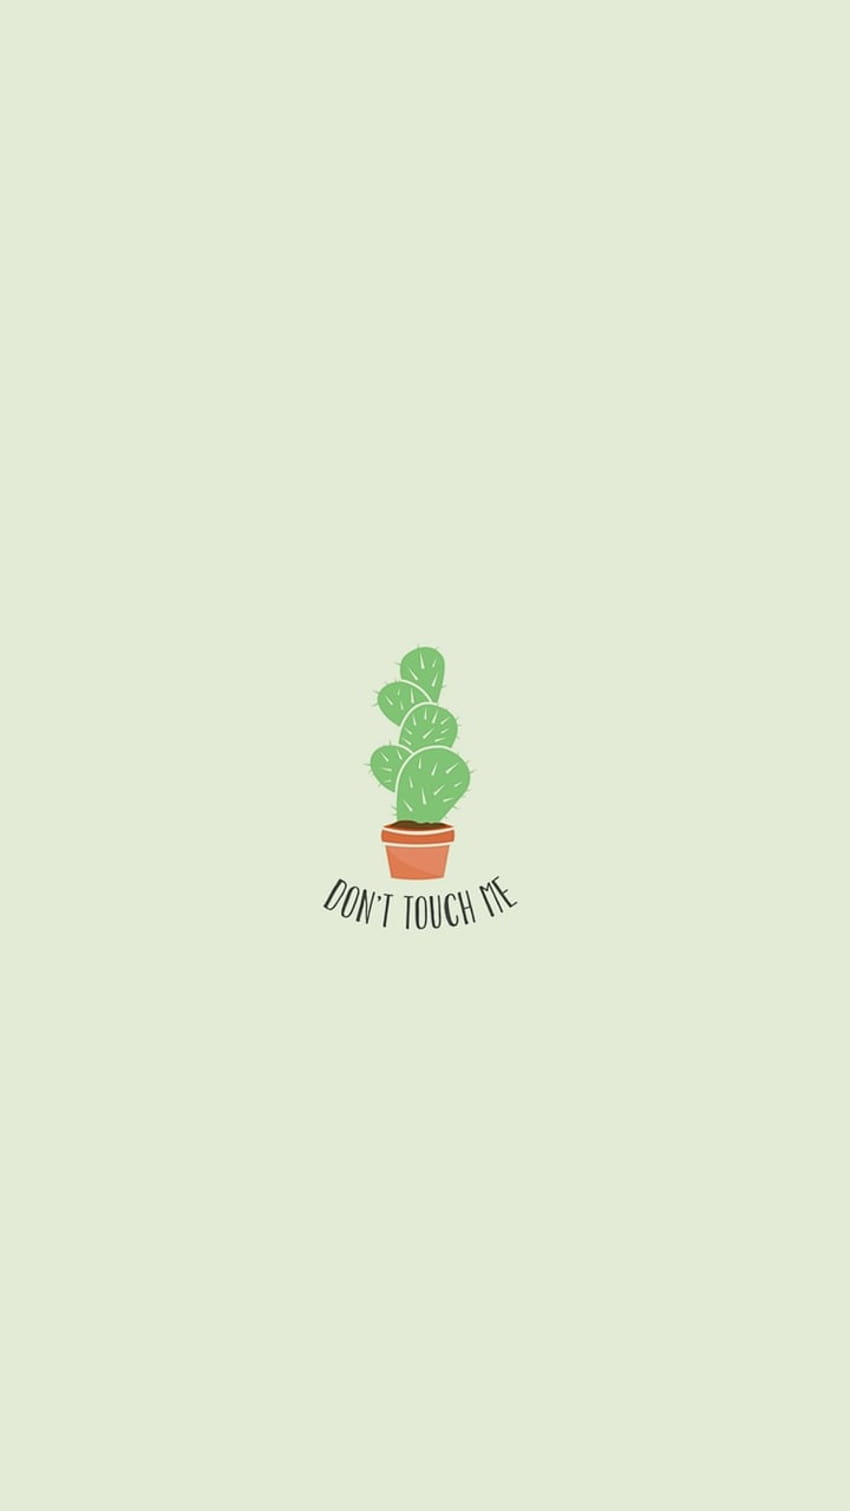 Mobile Wallpaper Cactus Cute Background Wallpaper Image For Free Download   Pngtree